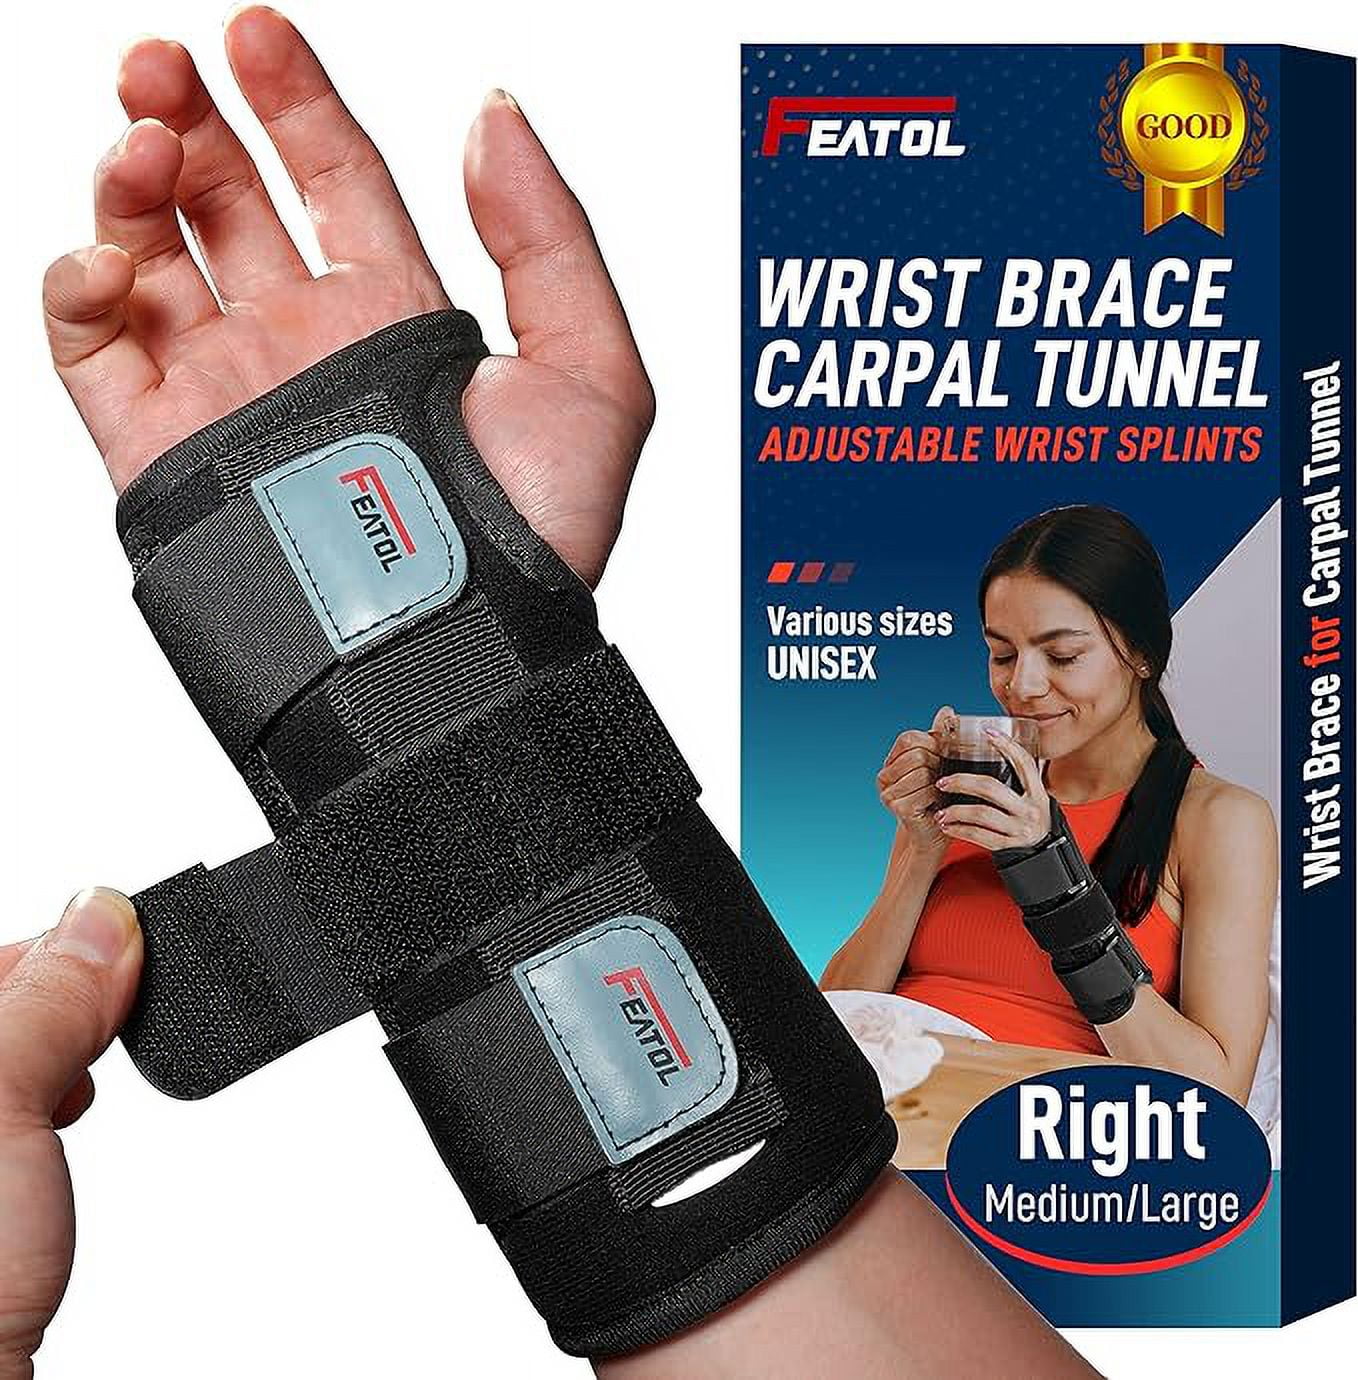 FEATOL Wrist Brace for Carpal Tunnel, Adjustable Night Wrist Support Brace  with Splints Right Hand, Medium/Large, Hand Support for Arthritis,  Tendonitis, Sprain, Injuries, Wrist Pain 